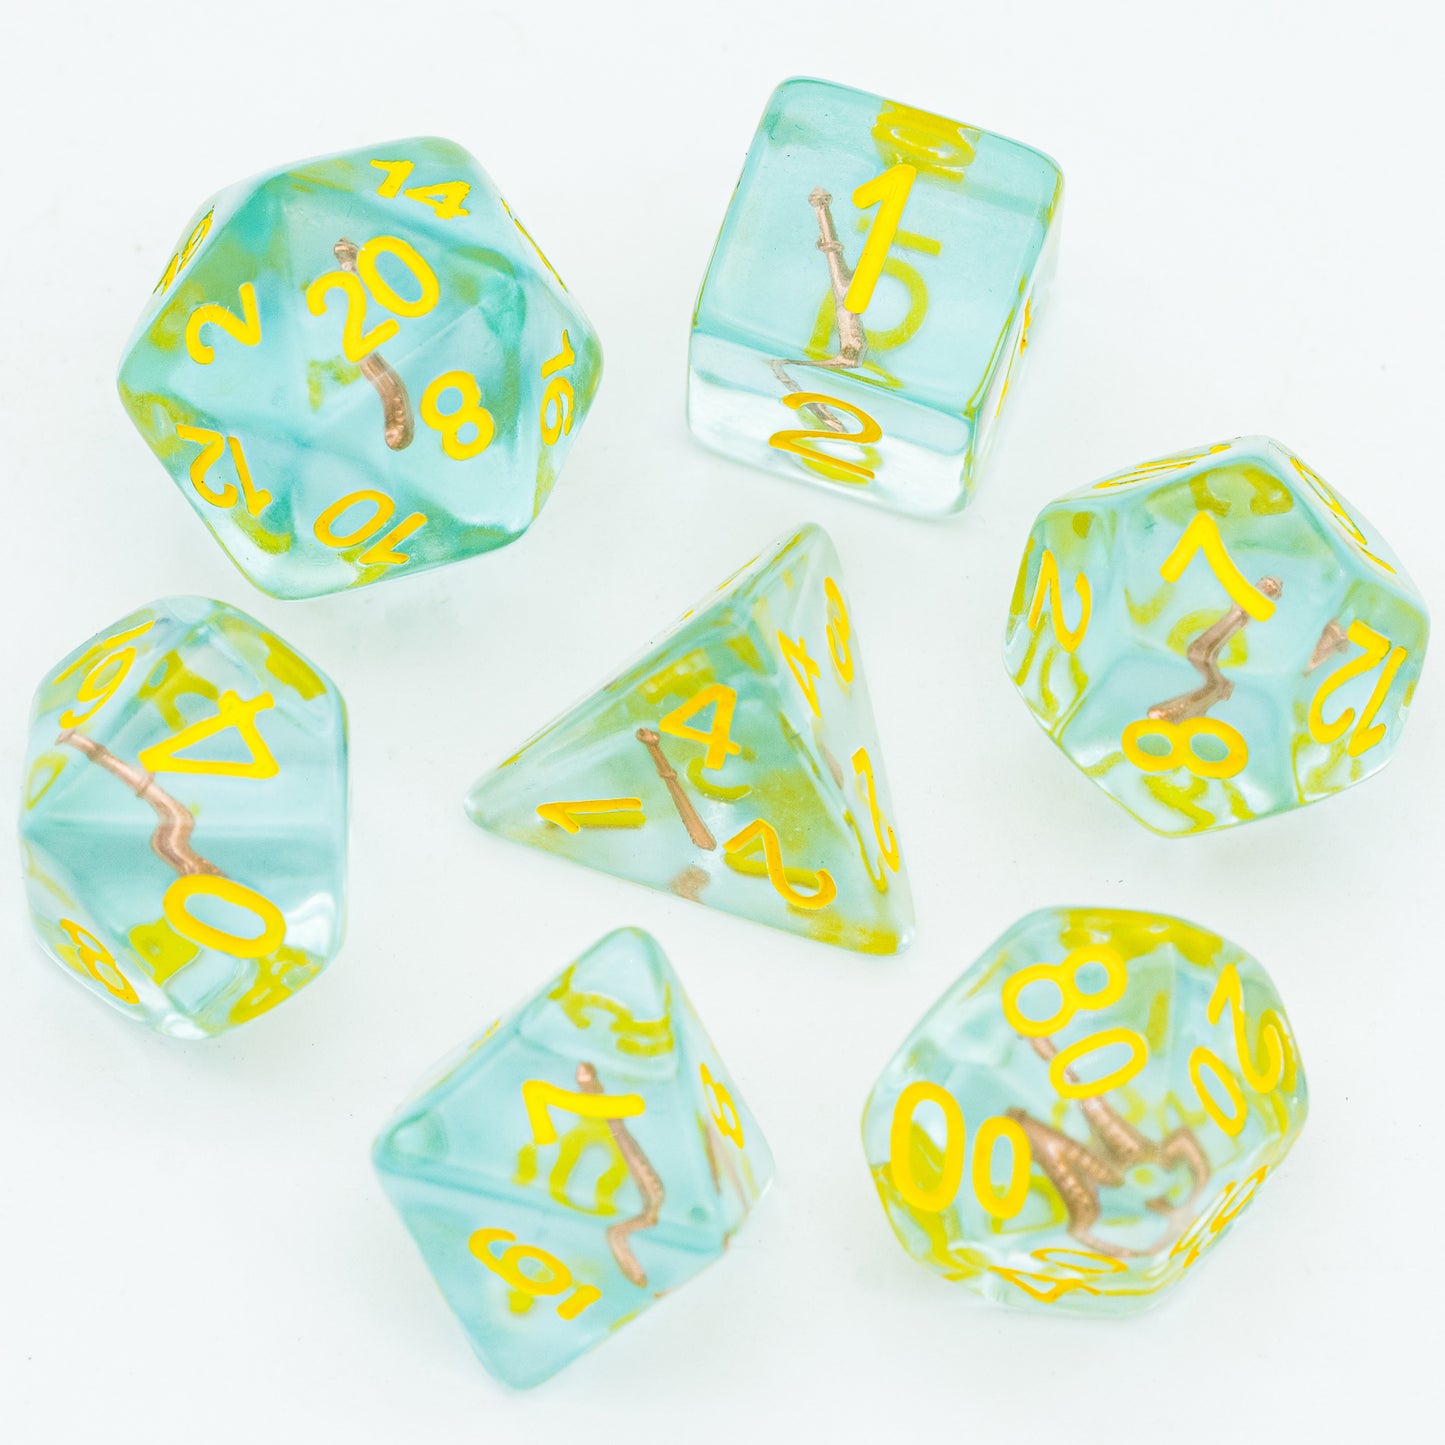 TRPG Character Class Resin Meeple Dungeon Dice Set